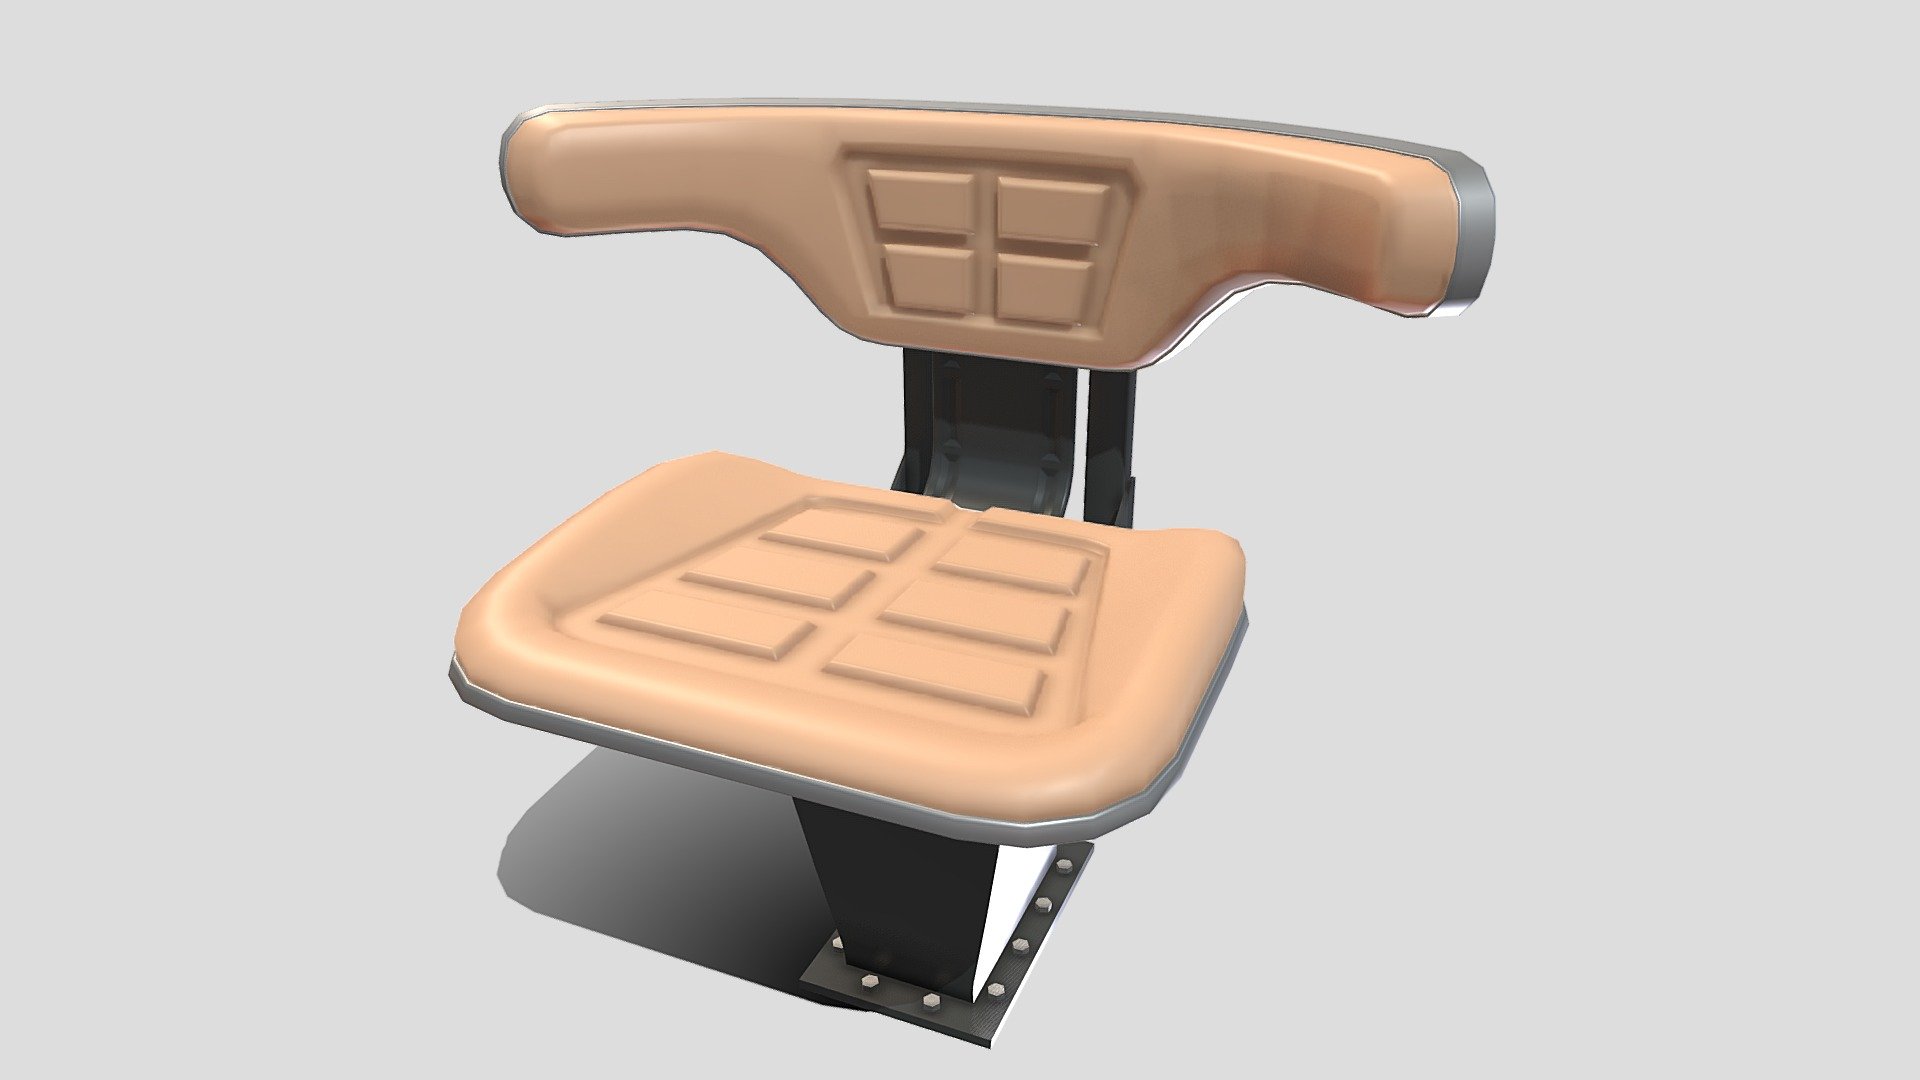 Tractor Seat 3d model rendered with Cycles in Blender, as per seen on attached images. 
The 3d model is scaled to original size in Blender.

File formats:
-.blend, rendered with cycles, as seen in the images;
-.obj, with materials applied;
-.dae, with materials applied;
-.fbx, with materials applied;
-.stl;

Files come named appropriately and split by file format.

3D Software:
The 3D model was originally created in Blender 2.8 and rendered with Cycles.

Materials and textures:
The models have materials applied in all formats, and are ready to import and render.

Preview scenes:
The preview images are rendered in Blender using its built-in render engine &lsquo;Cycles'.
Note that the blend files come directly with the rendering scene included and the render command will generate the exact result as seen in previews.
Scene elements are on a different layer from the actual model for easier manipulation of objects 3d model